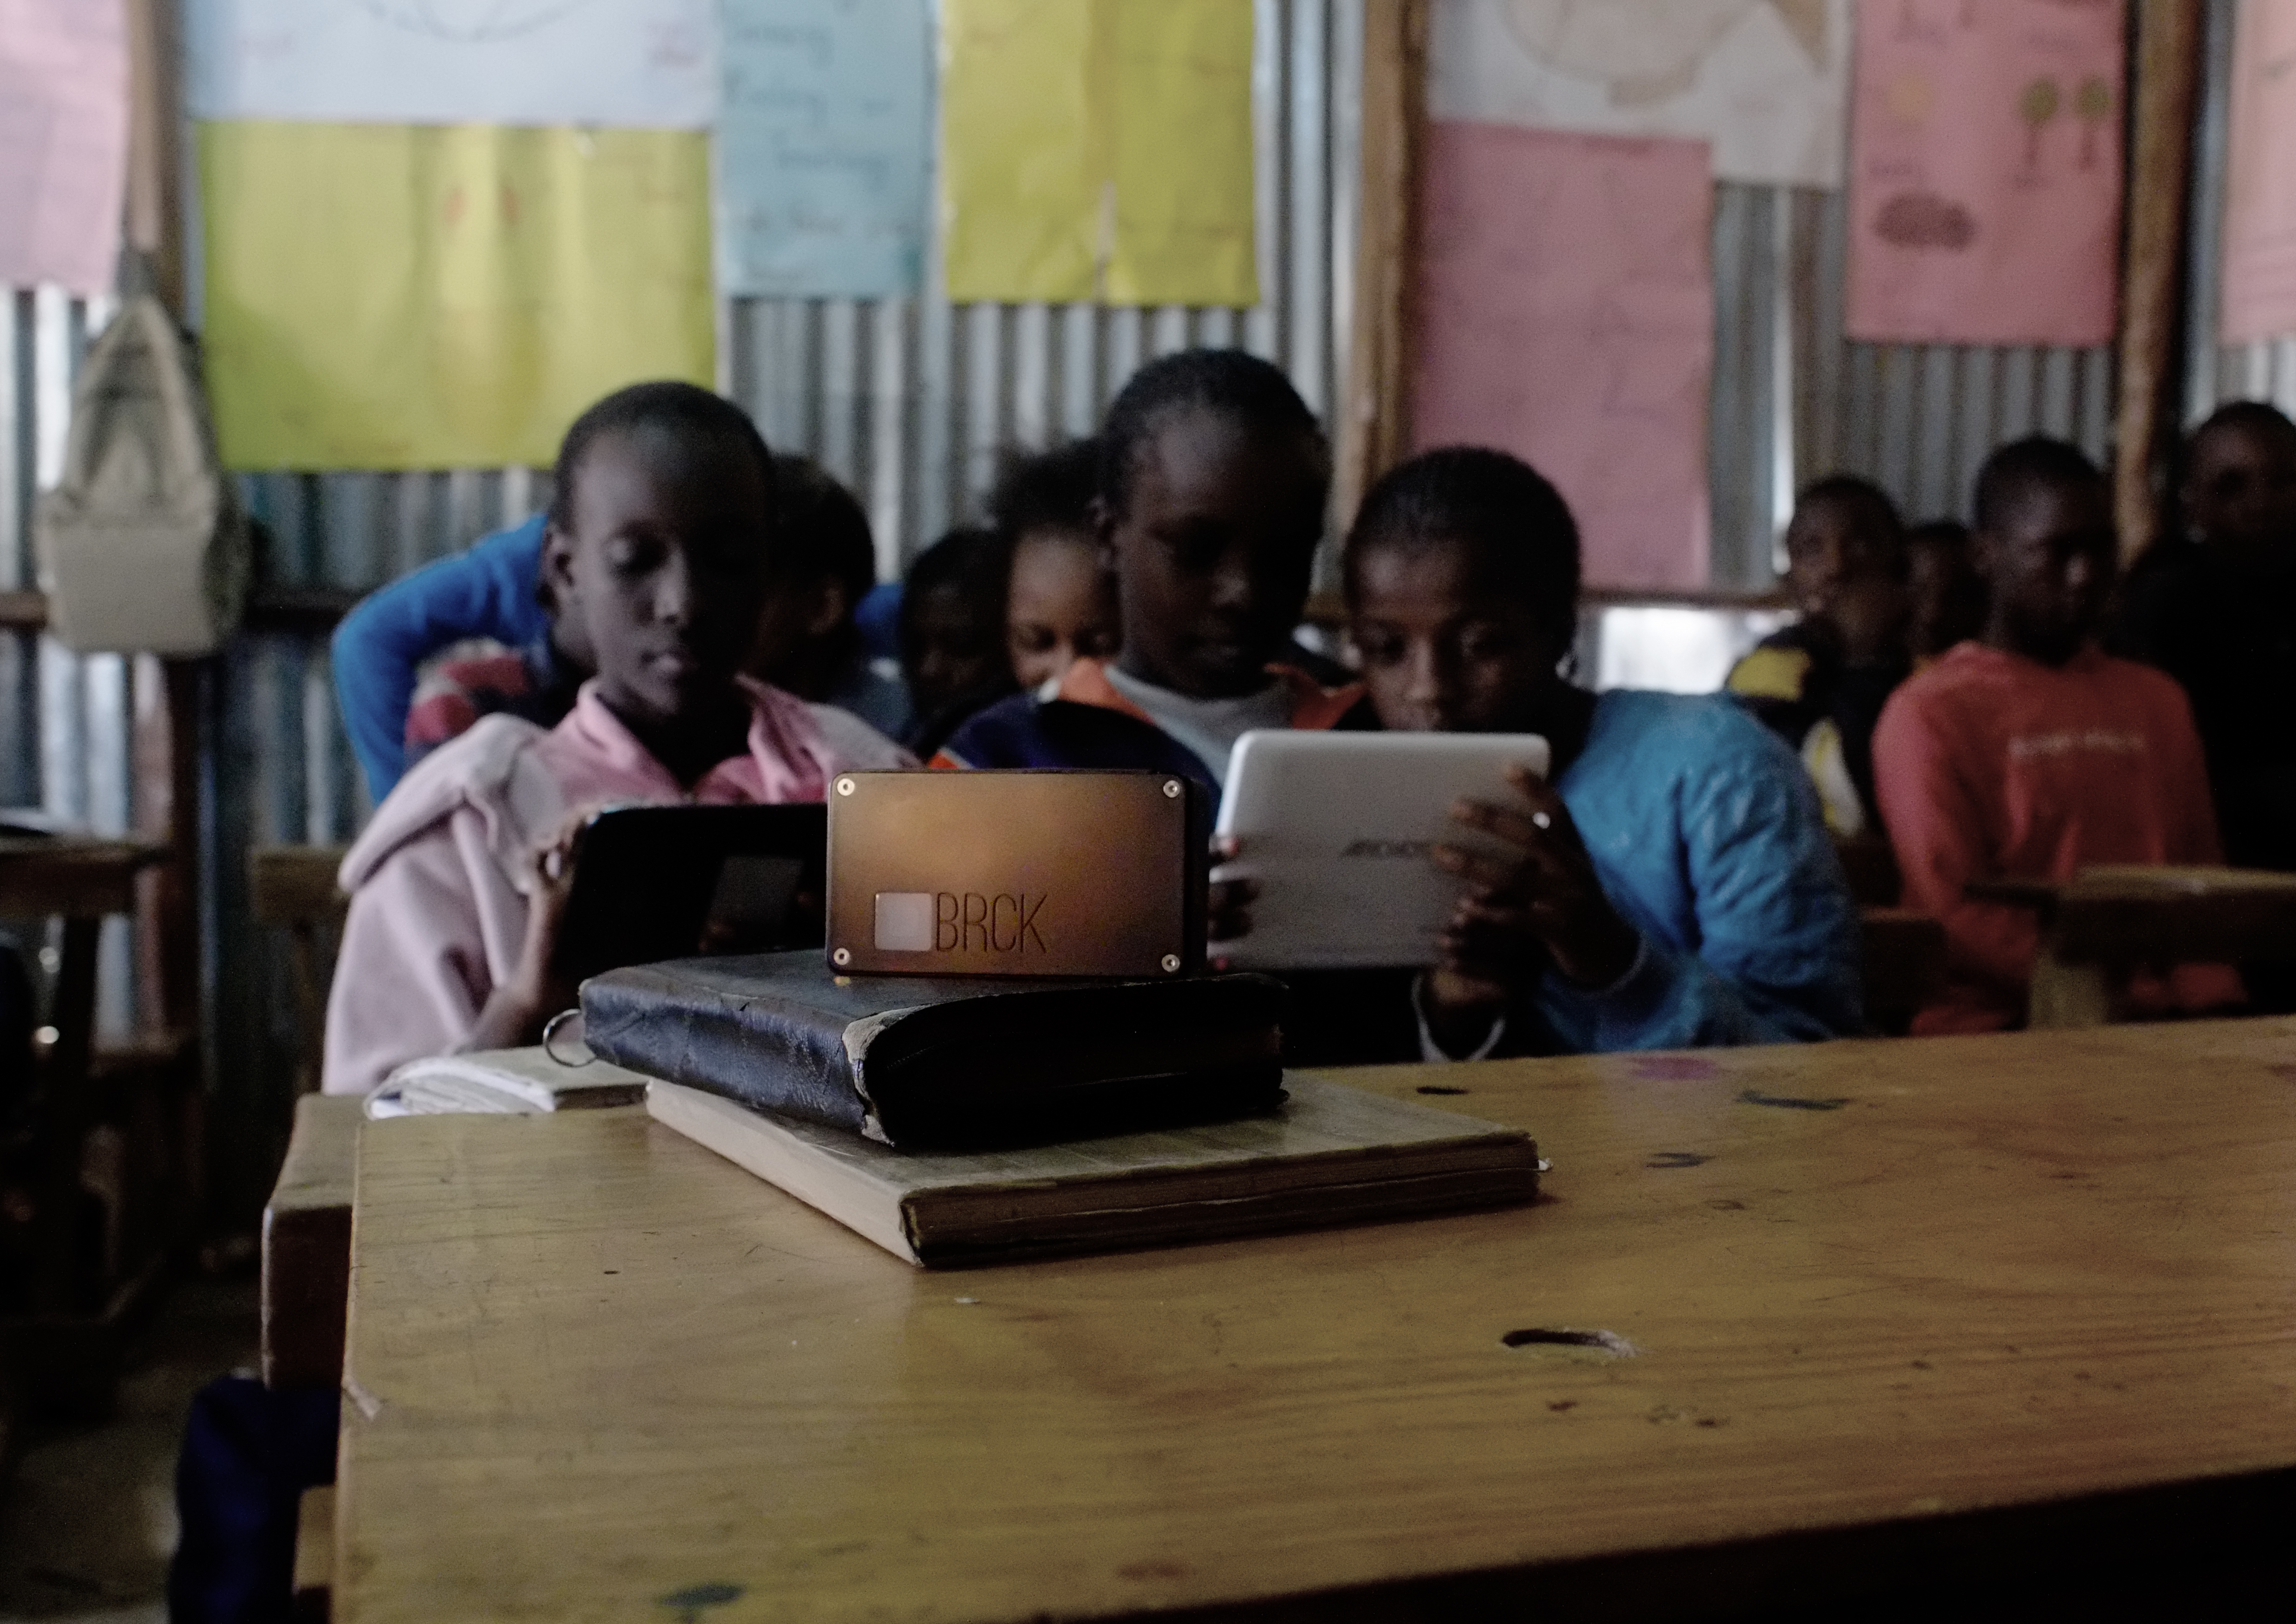 BRCK and tablets loaded with educational content can open up a world of resources for the children in this Nairobi school. Photo: BRCK